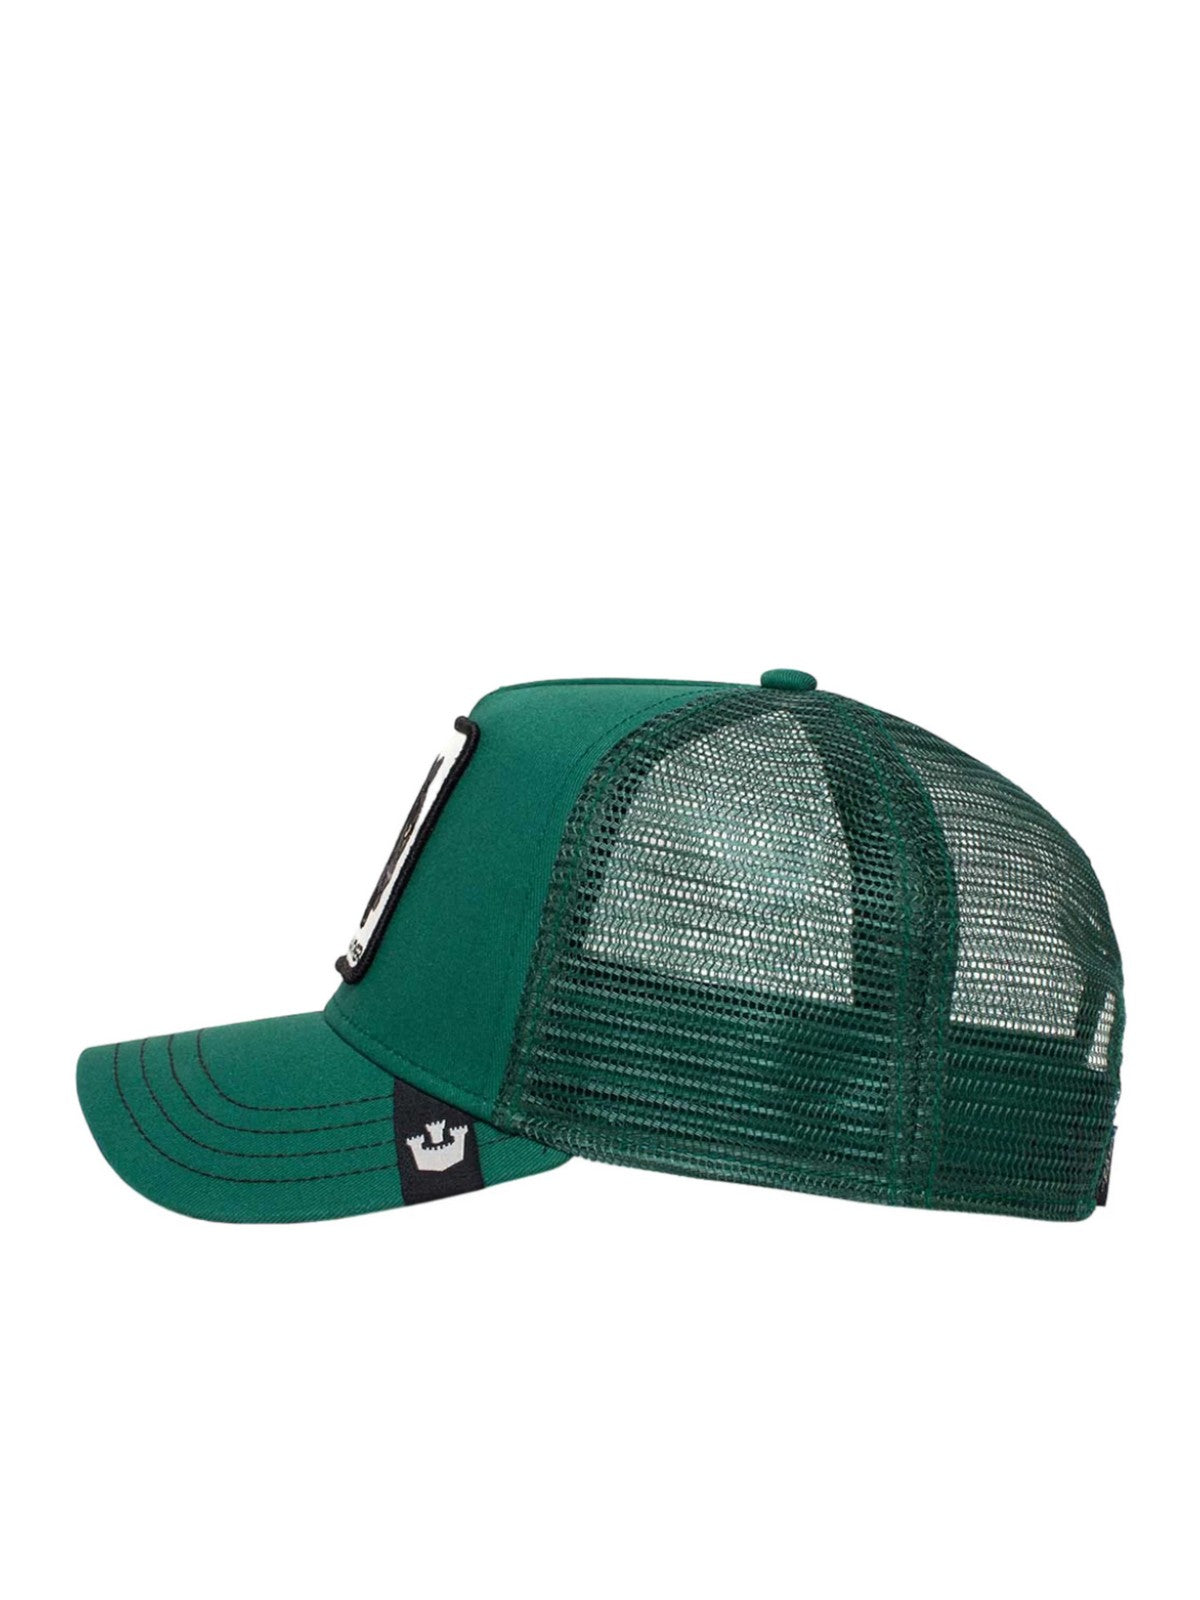 GOORIN BROS Chapeau homme The panther 101-0381-GRE Vert